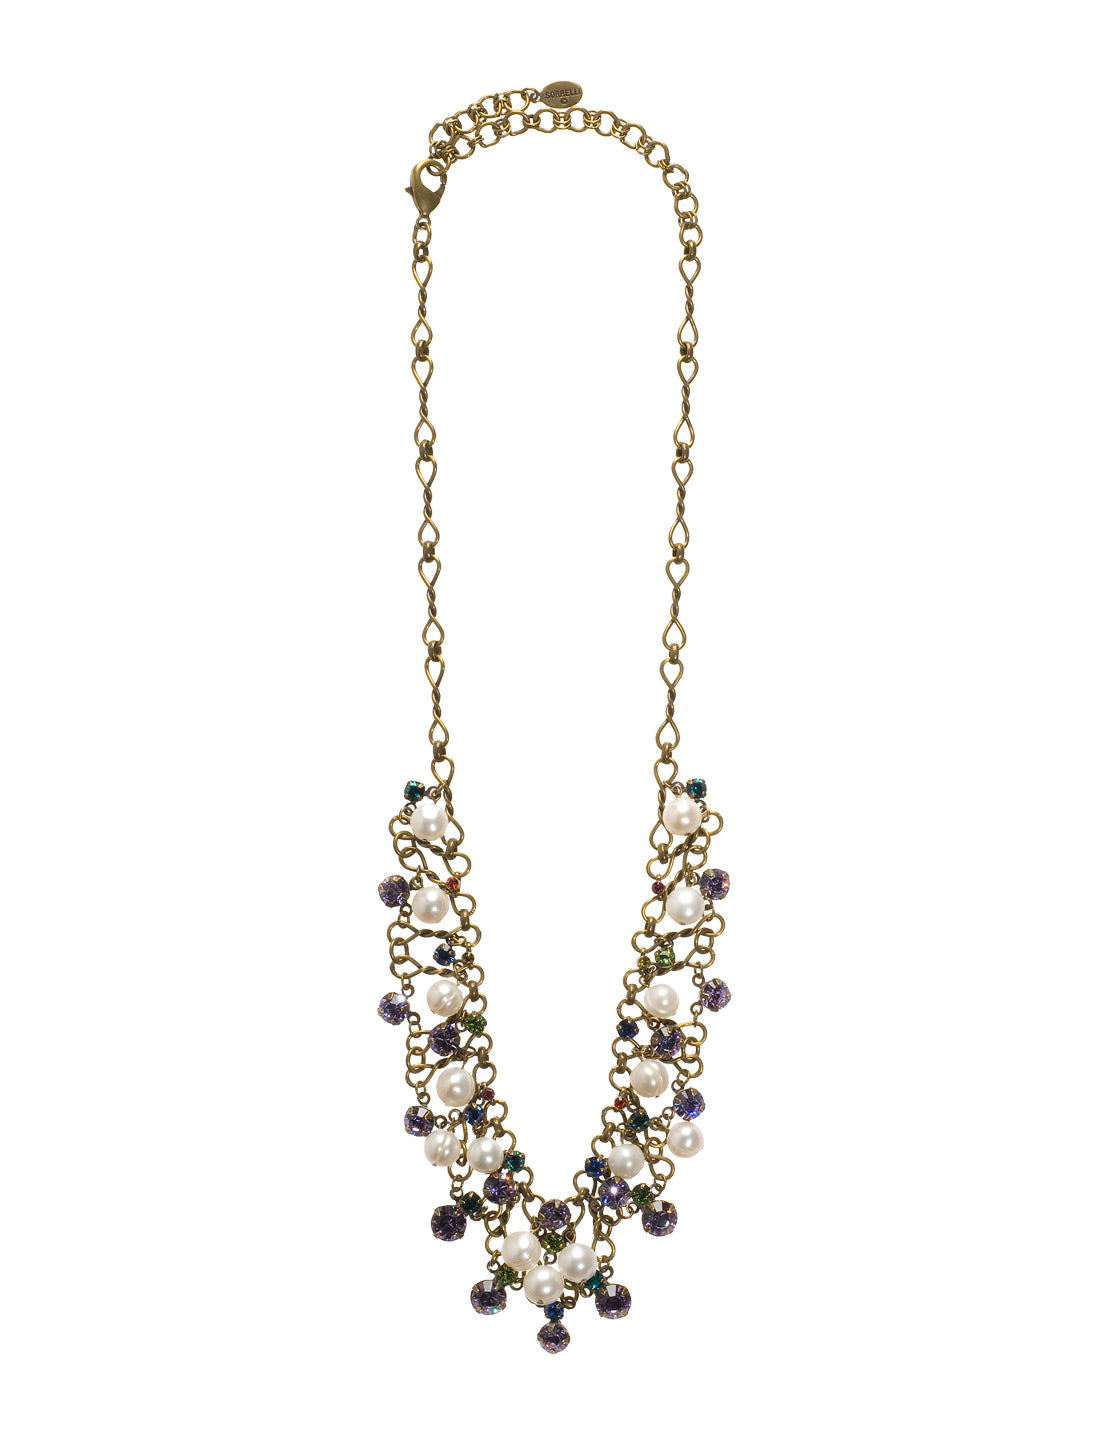 Clustered Crystal and Bead Tennis Necklace - NCF5AGHAR